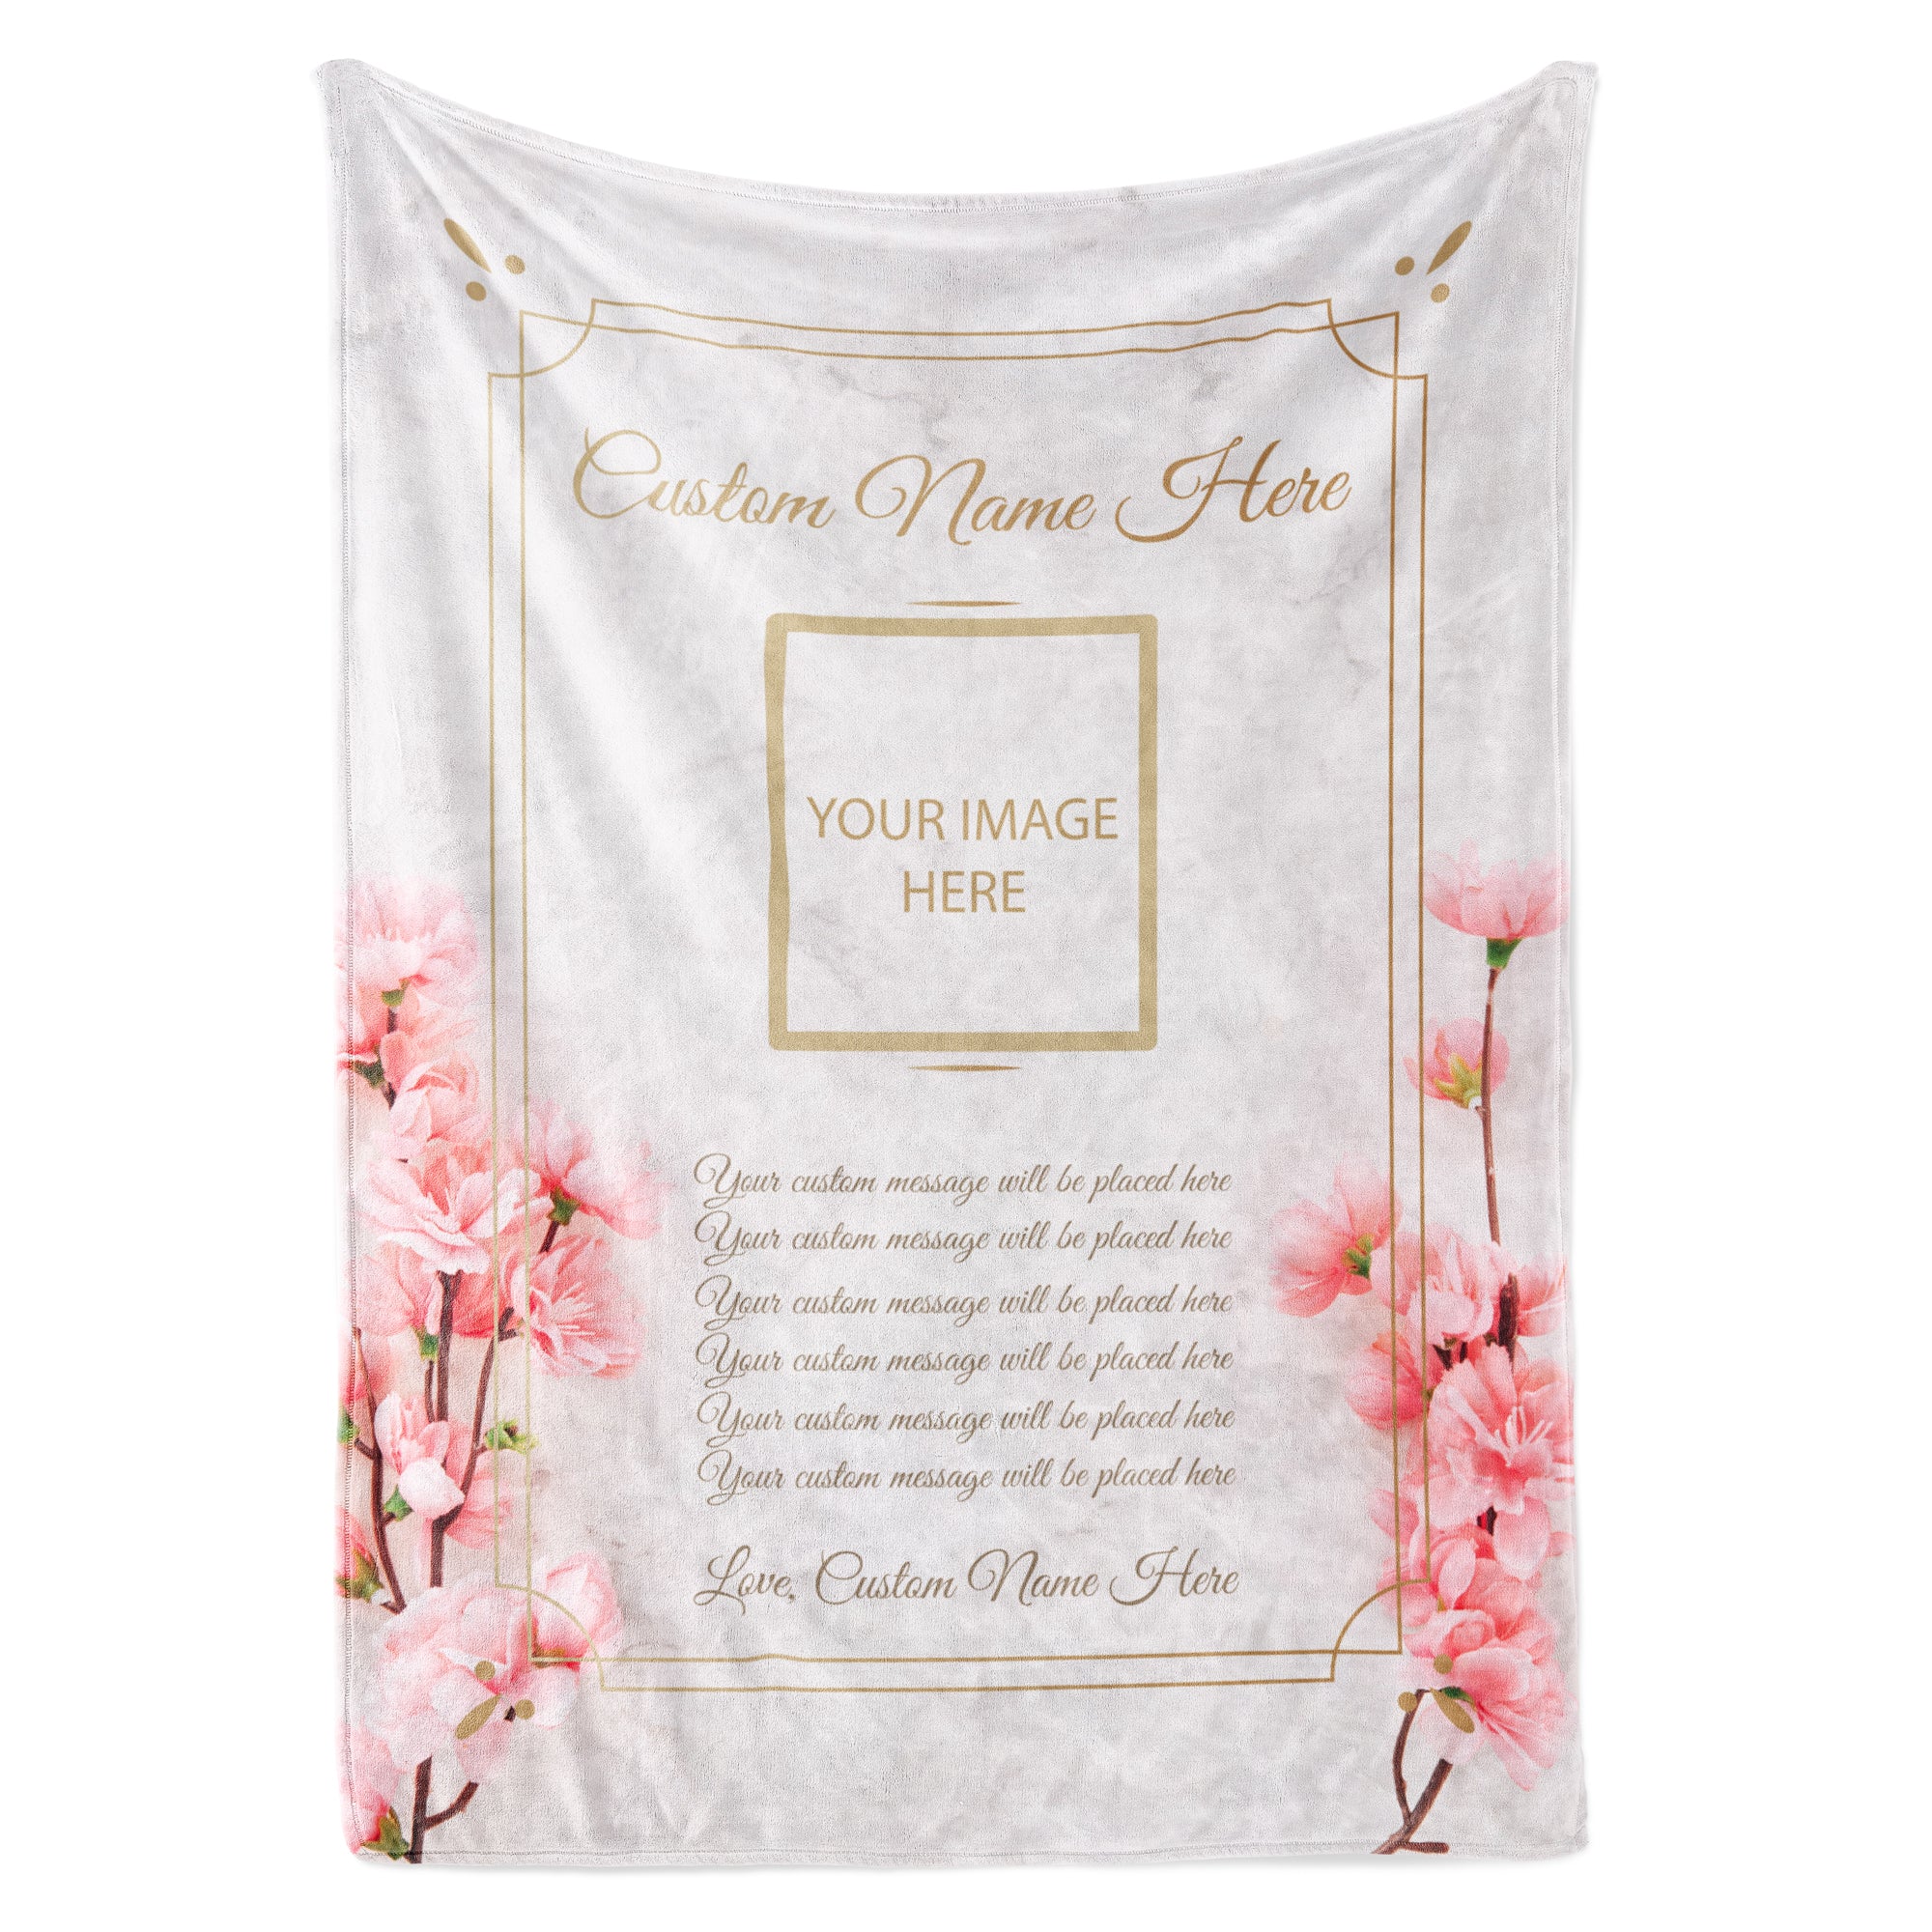 Personalized Photo Blanket For Mom: Written Letter Gifts For Mom